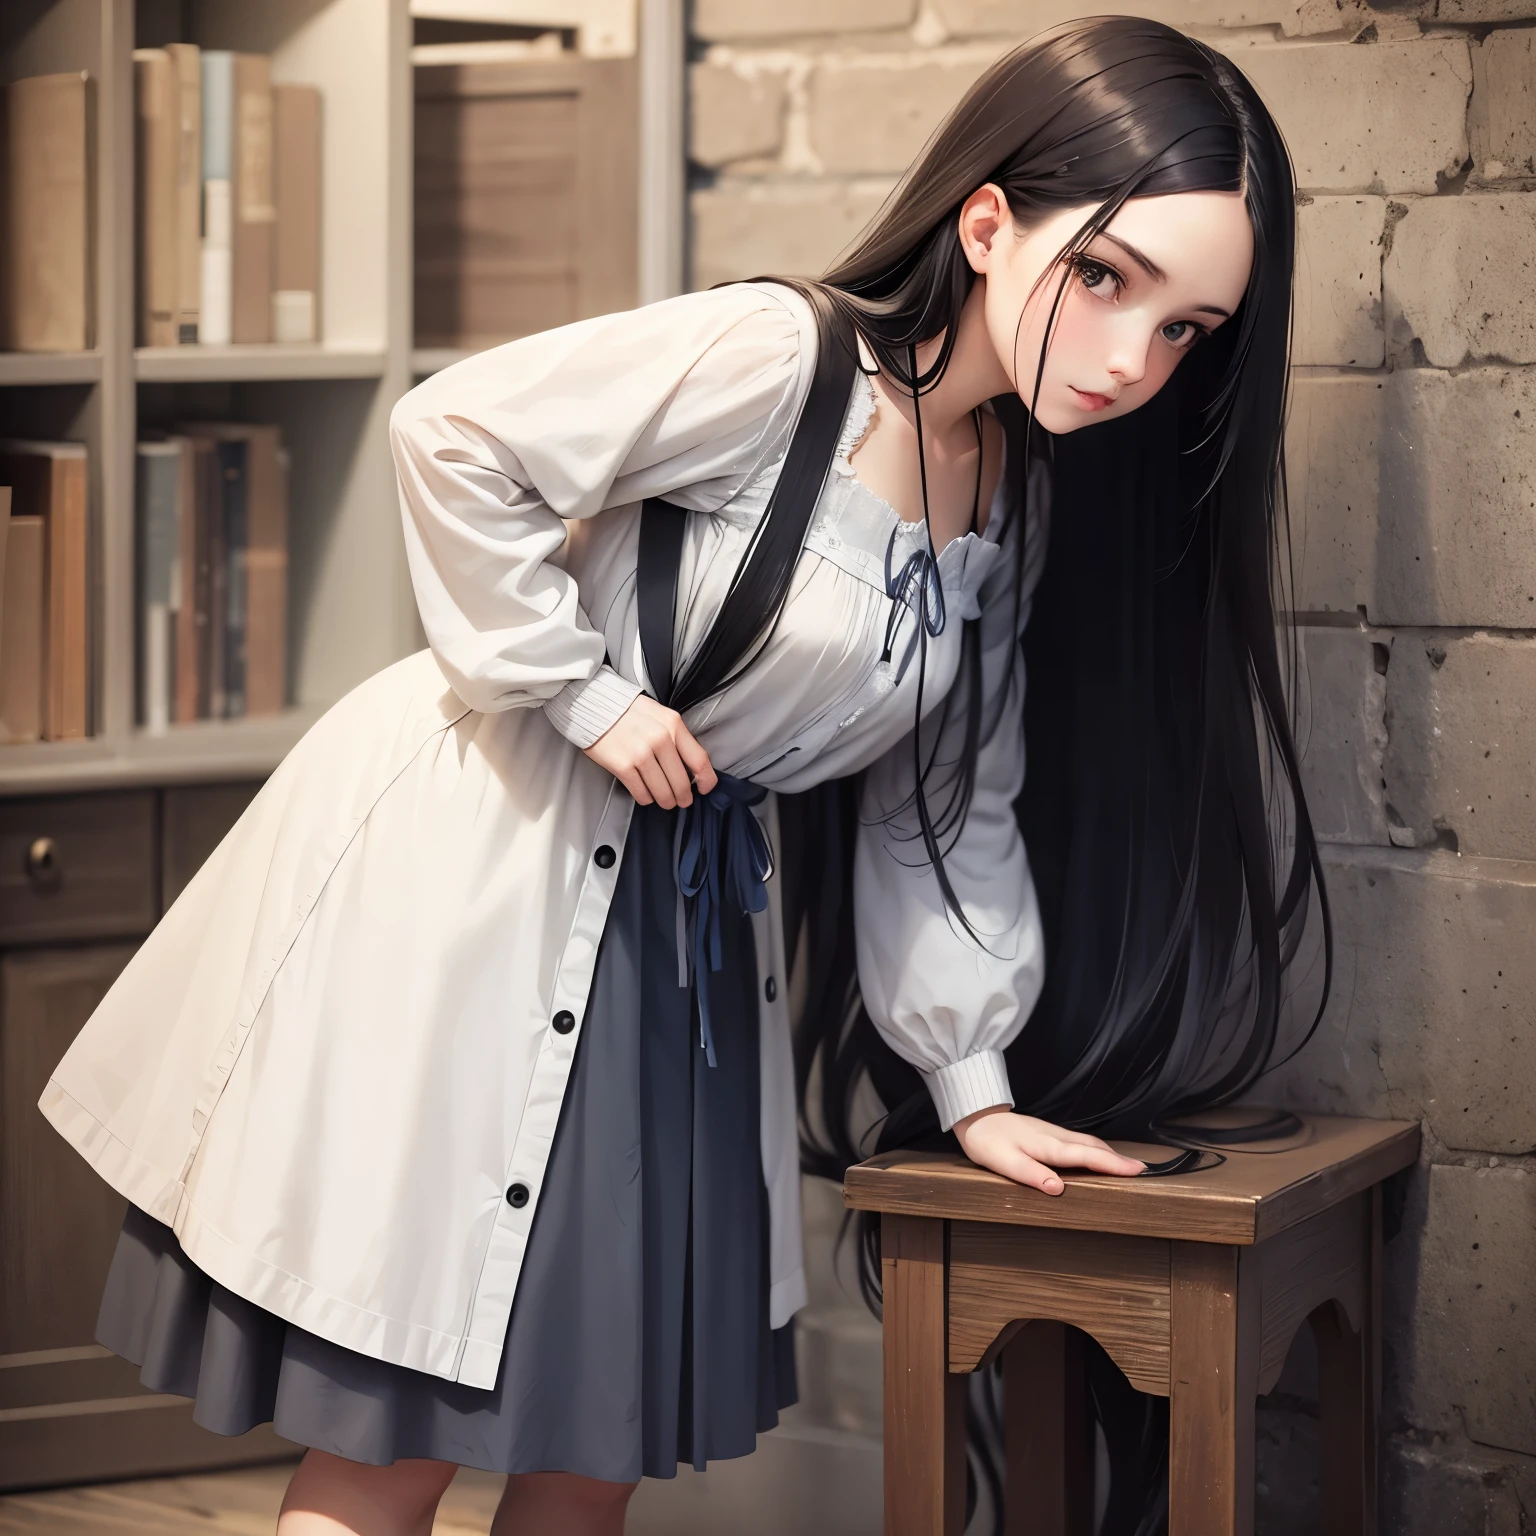 Young white girl with long black hair white lock on the left side of her hair dressed in old and antique grayish blue